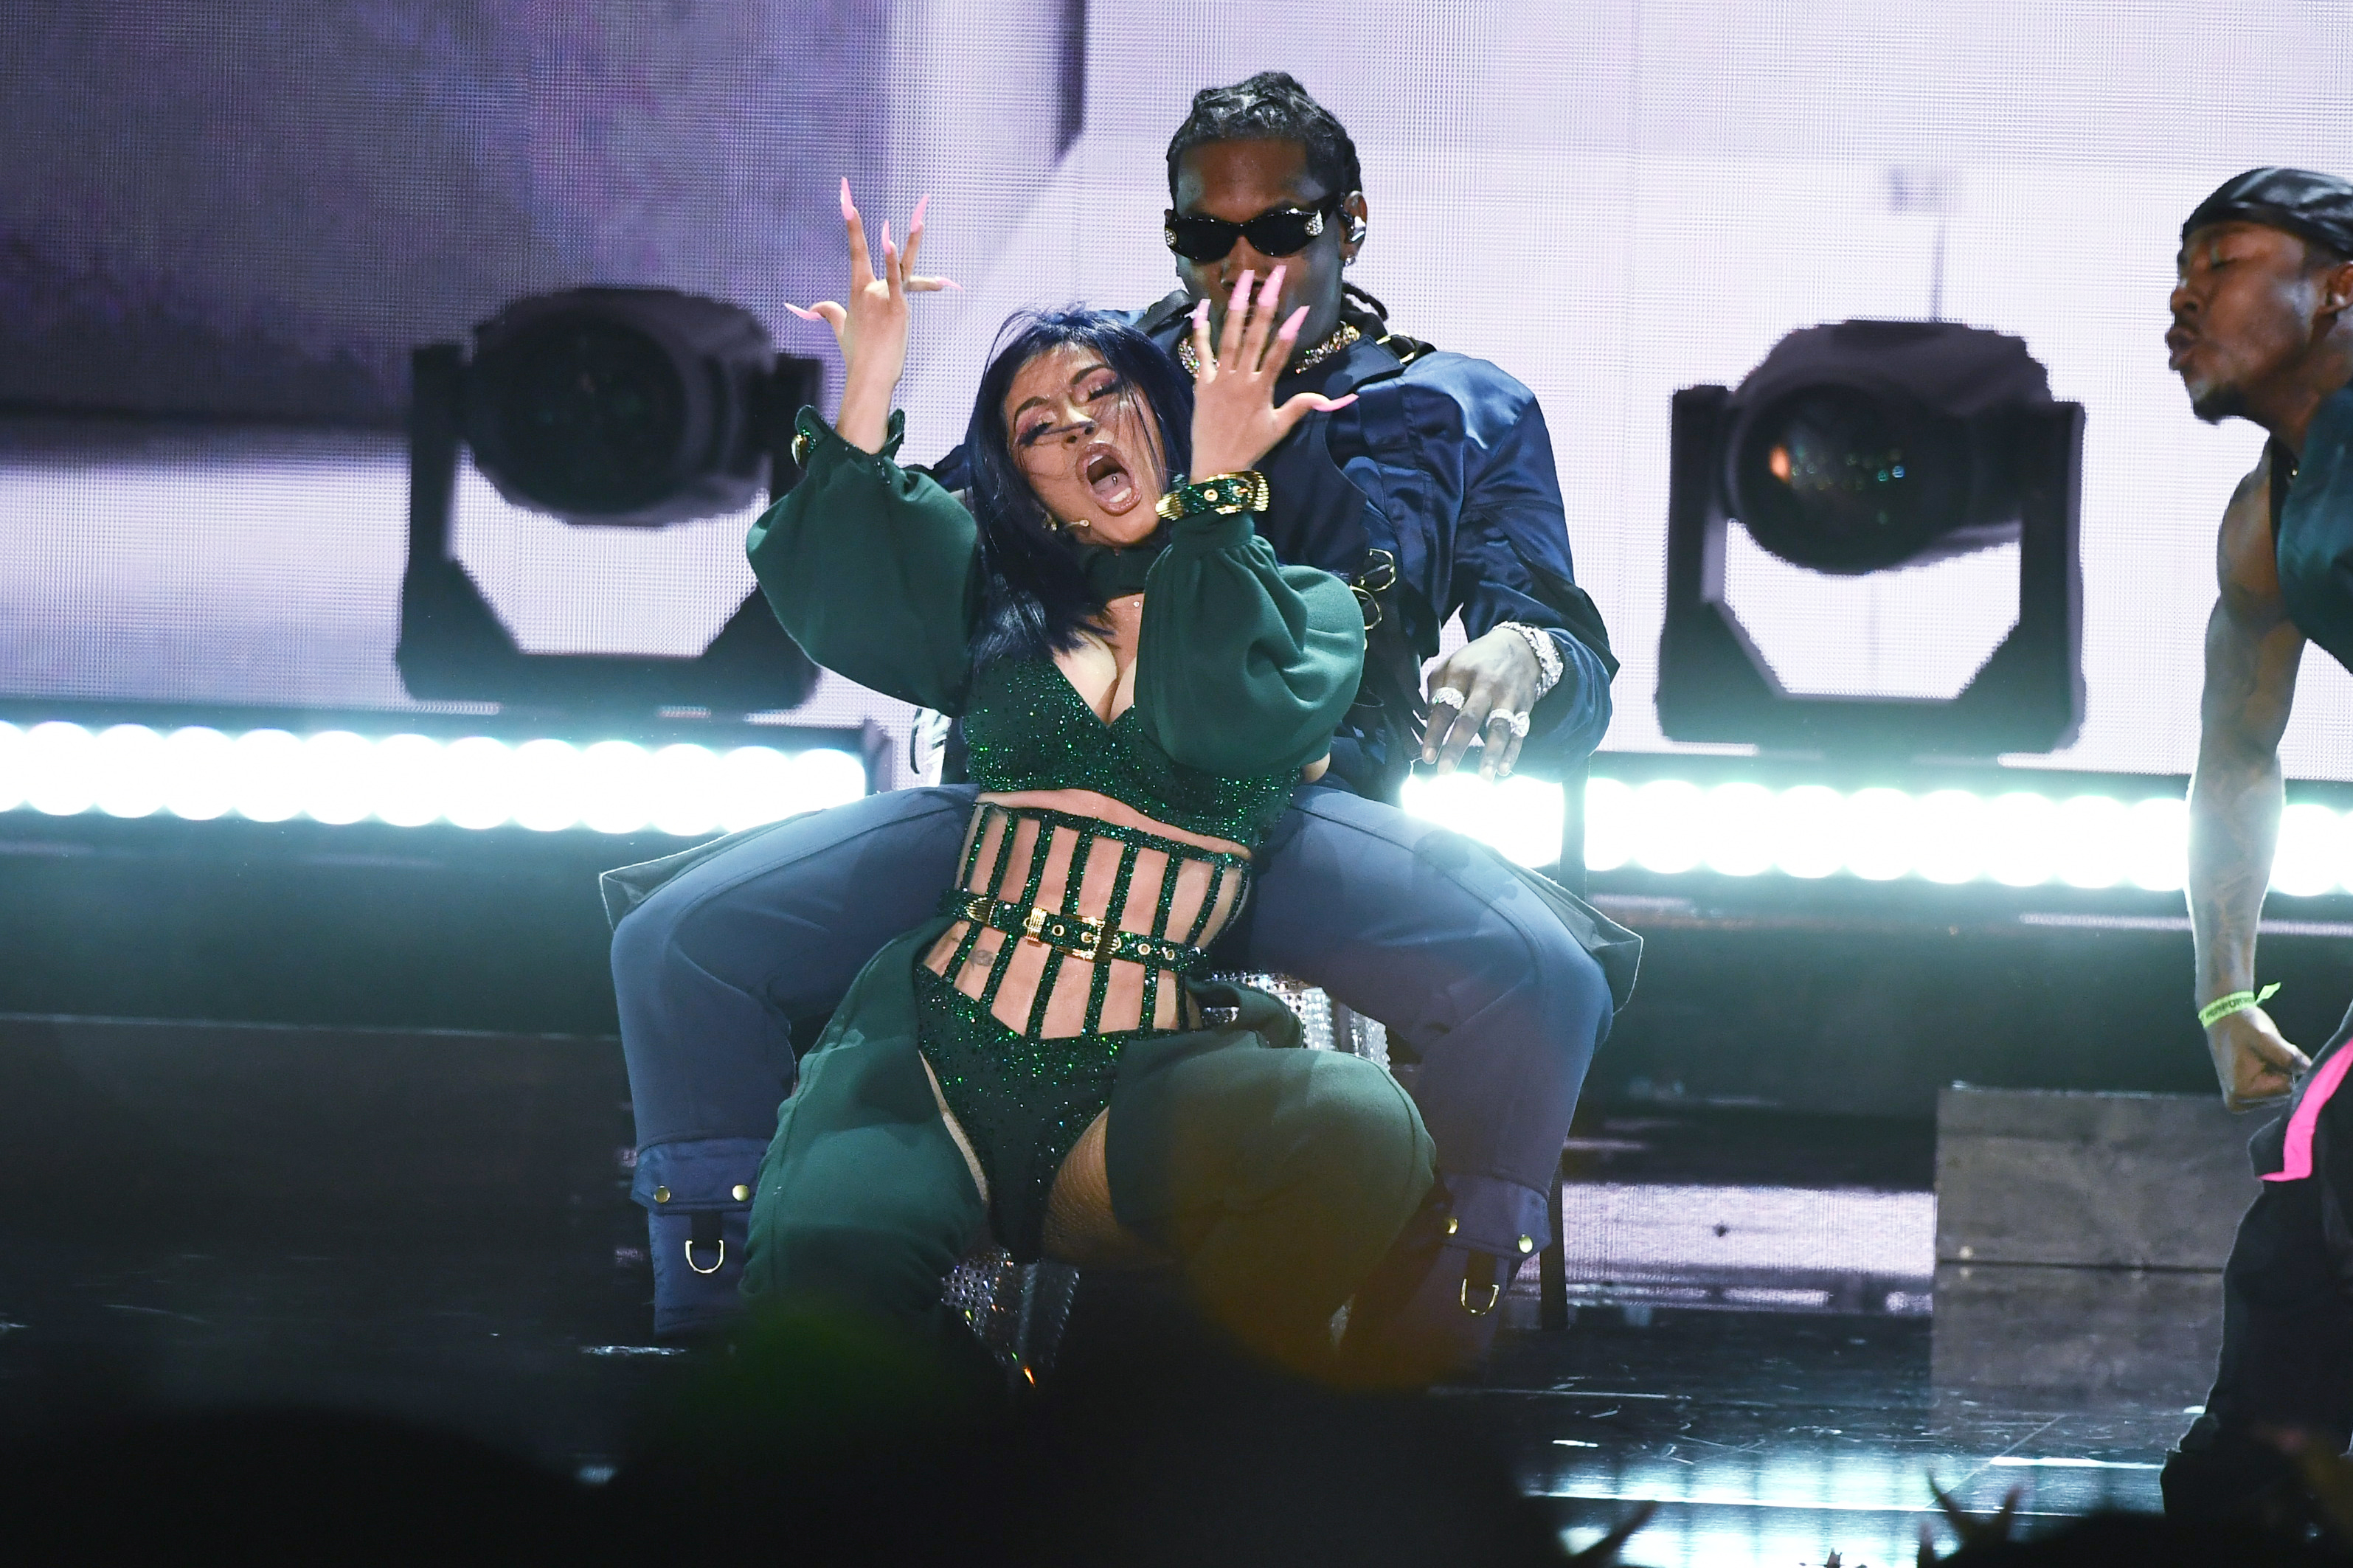 Cardi B set the stage on fire when she opened the 2019 BET Awards with a raunchy performance featuring her husband, rapper Offset